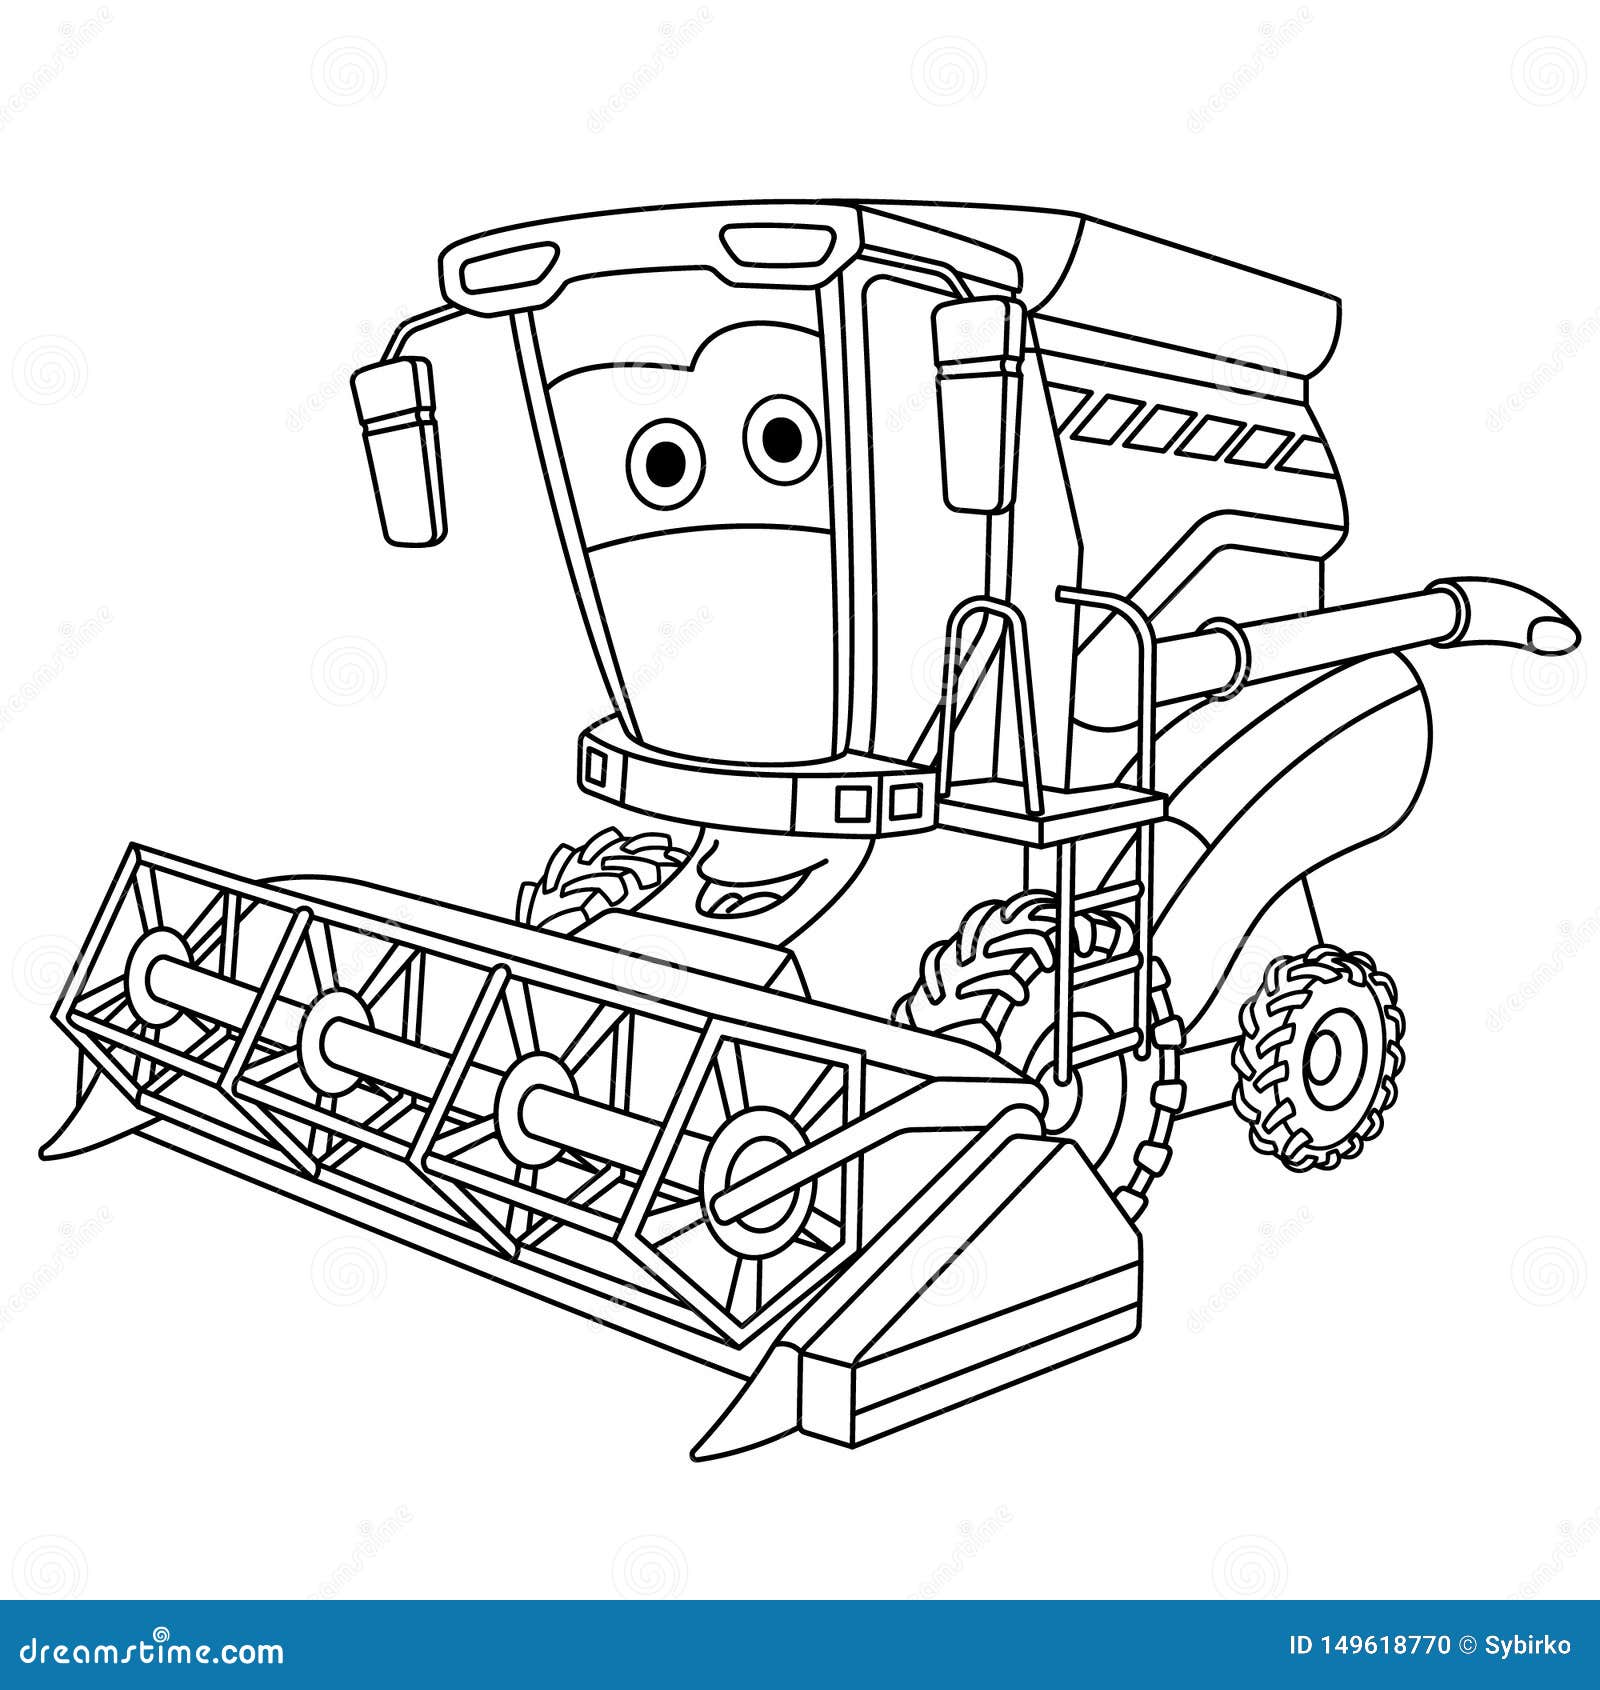 Coloring Page With Harvester Combine Stock Vector Illustration Of Concept Agricultural 149618770